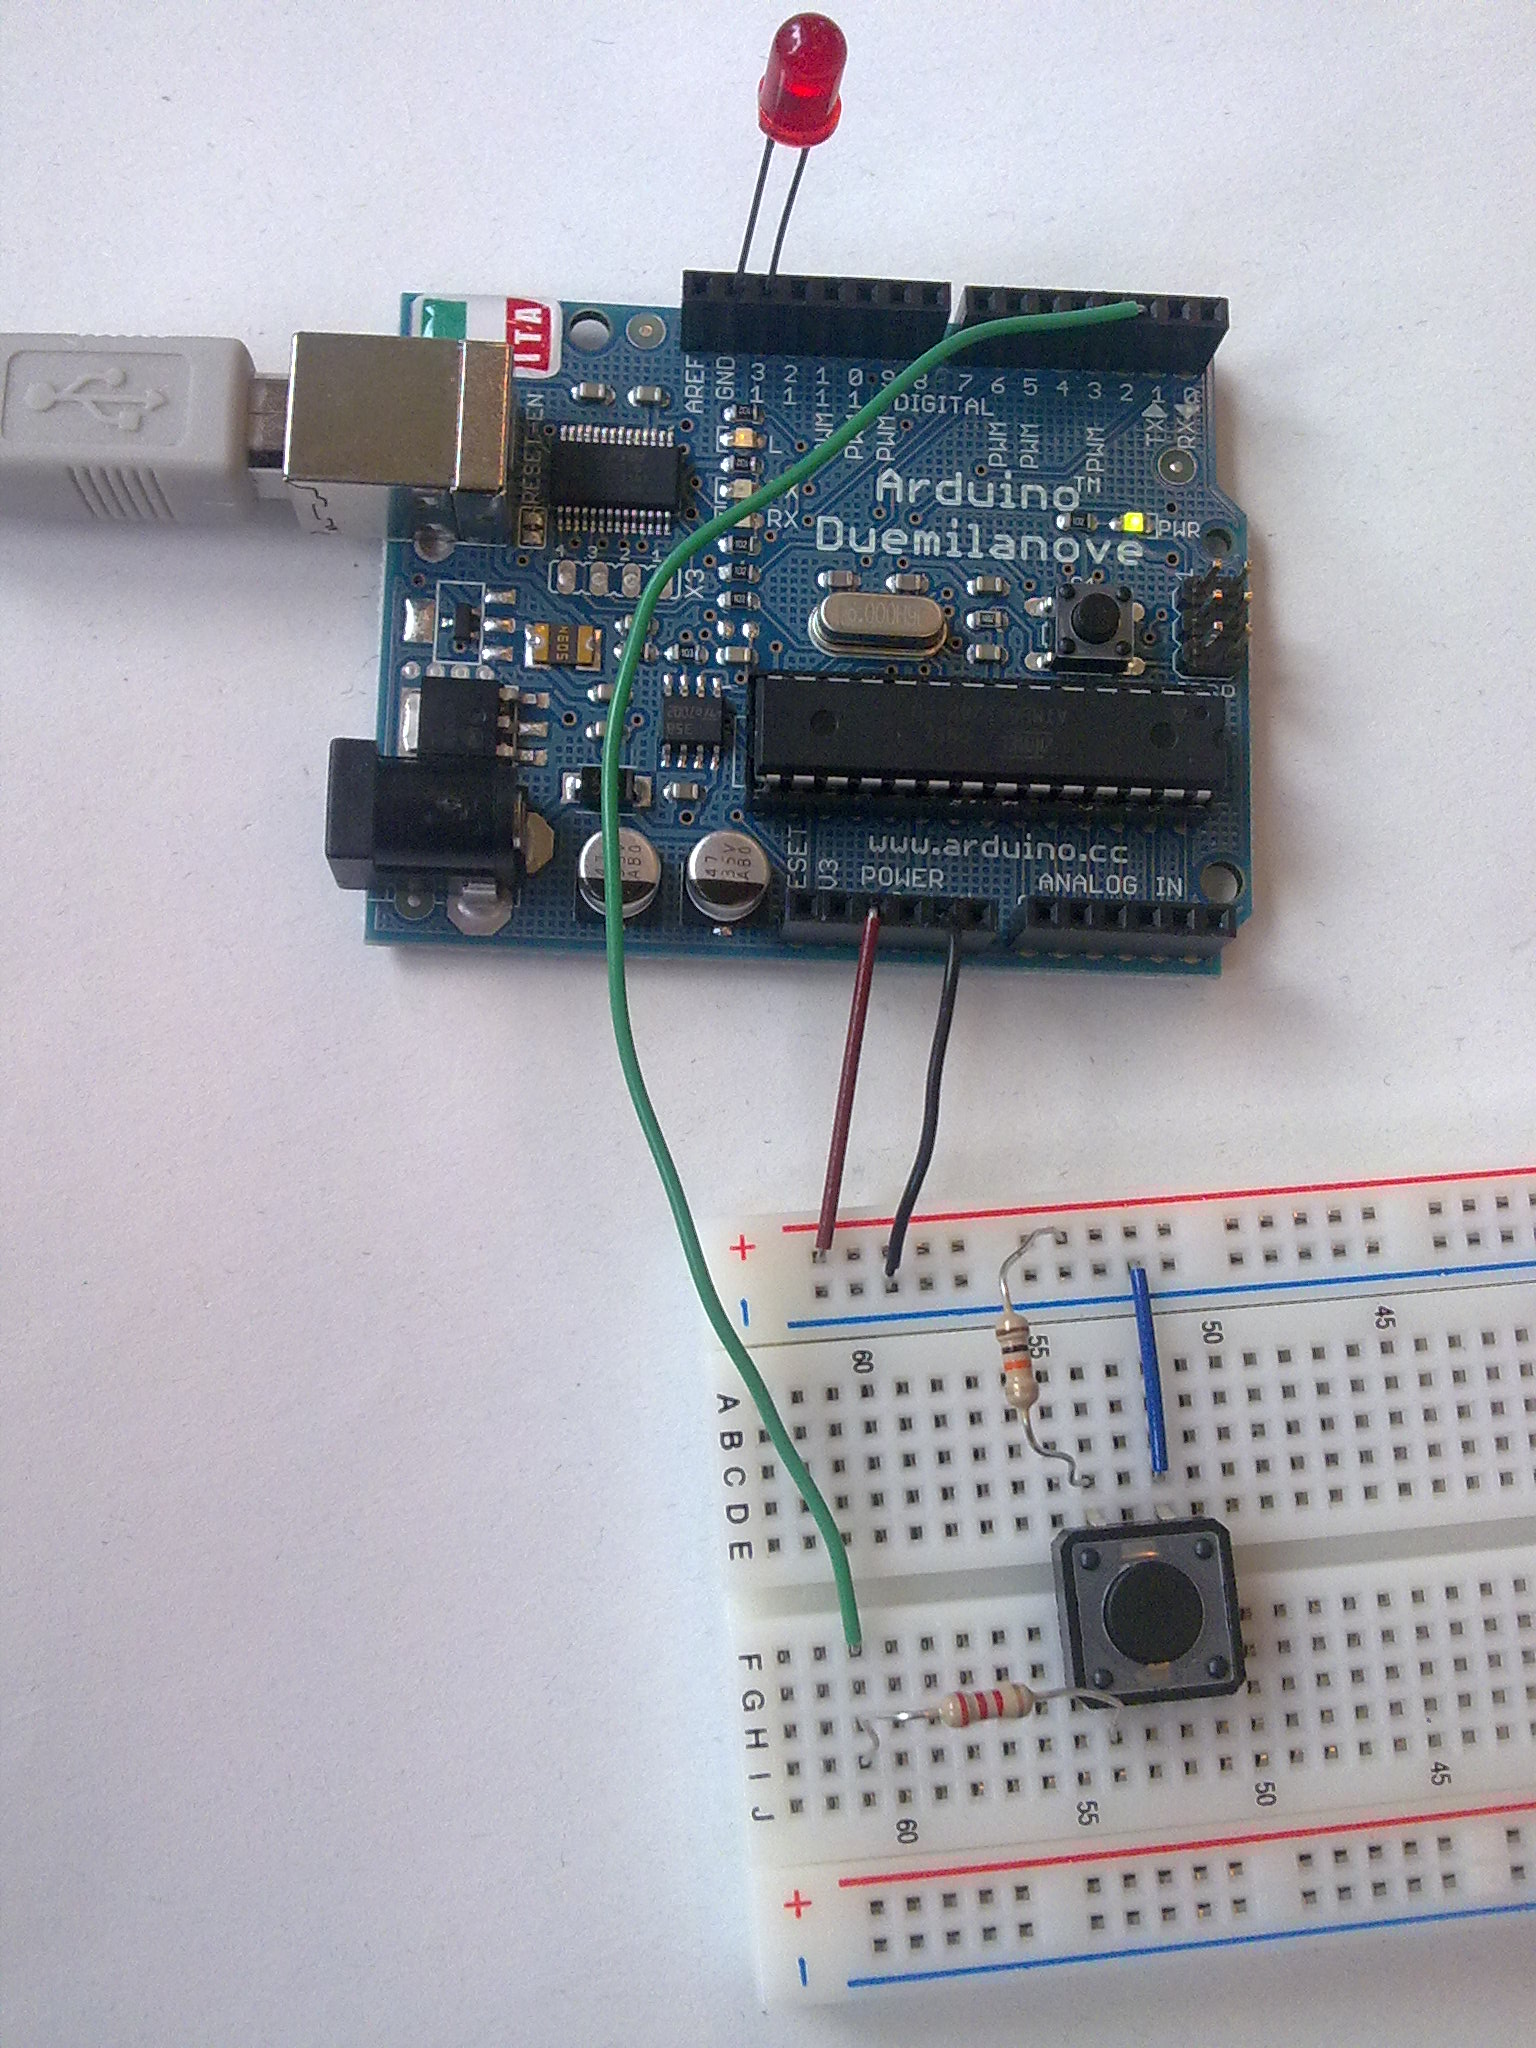 pascal serial communication with arduino